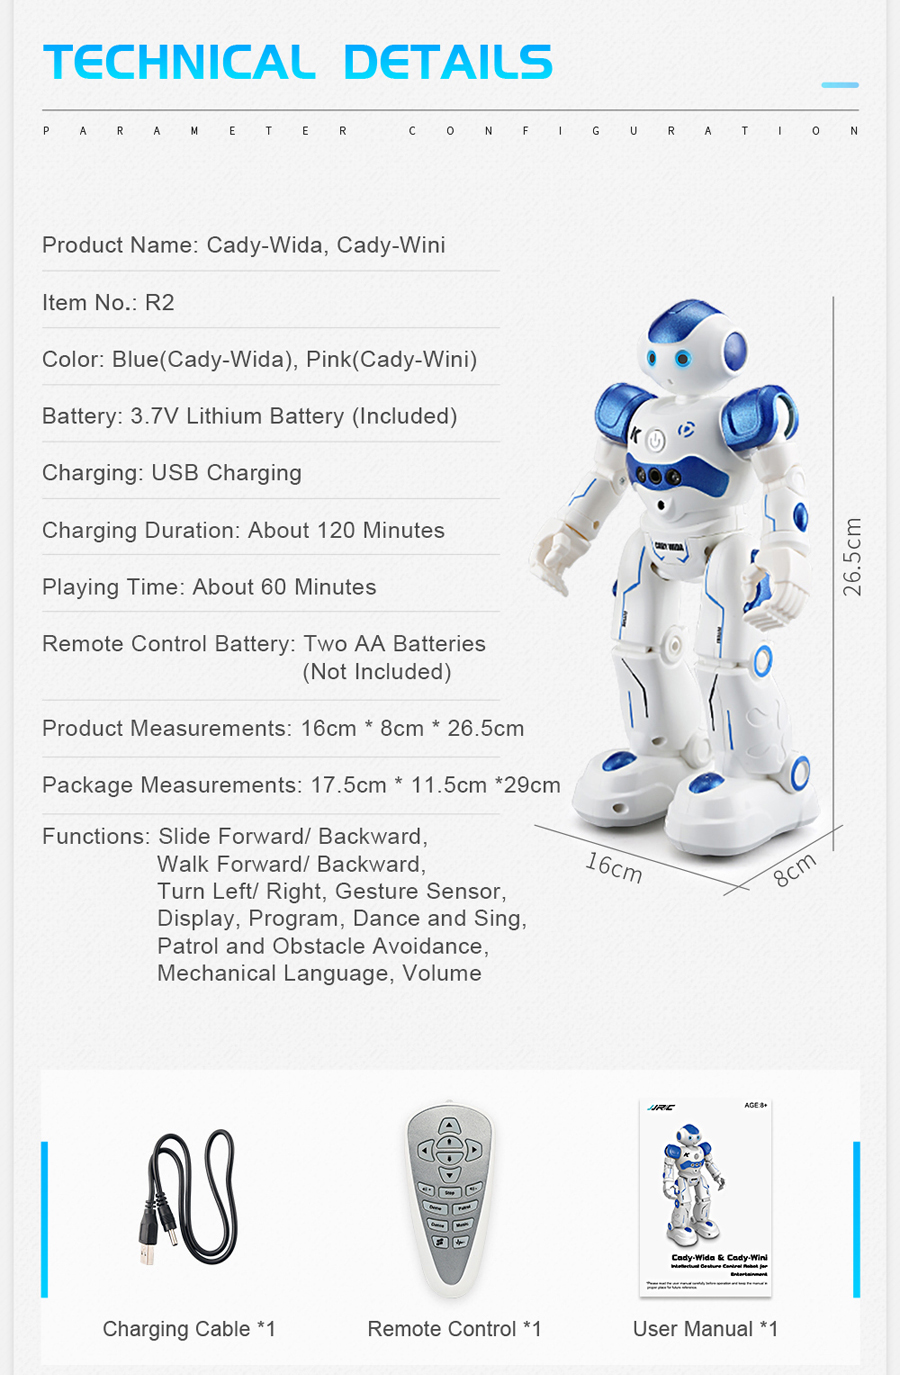 JJRC R2 Cady USB Charging Dancing Gesture Control Robot Toy 46